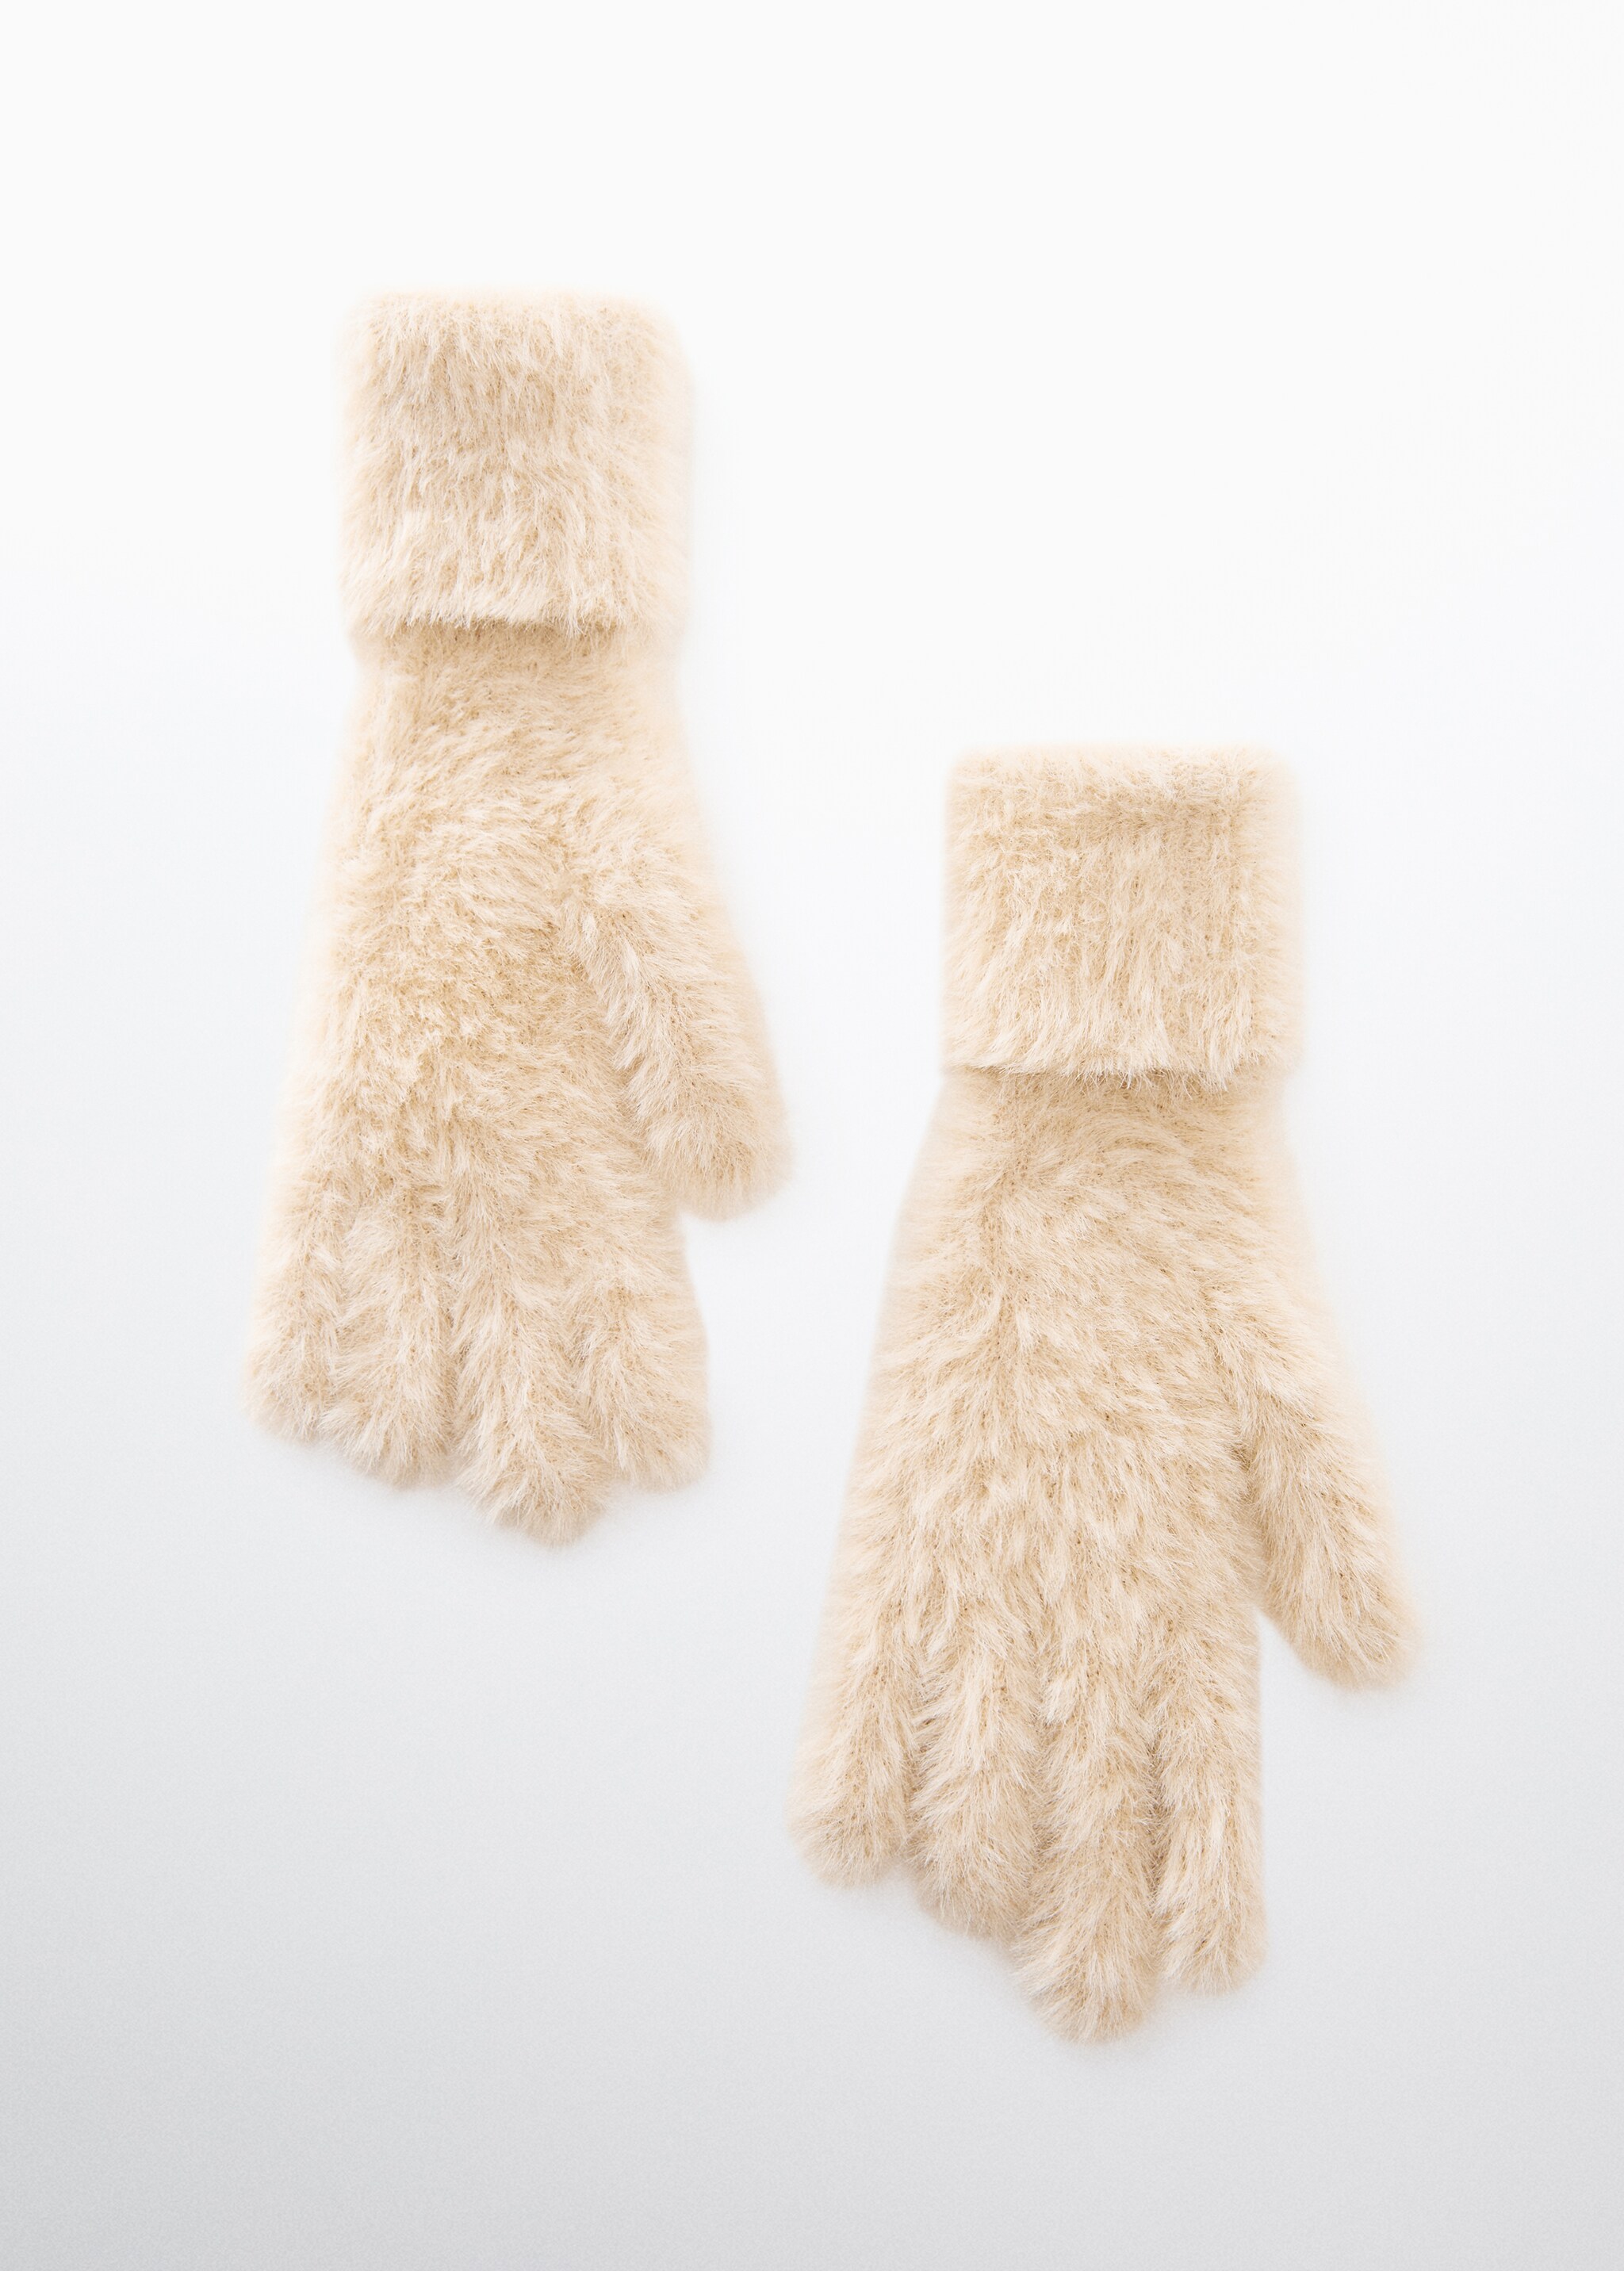 Fur-effect gloves - Article without model